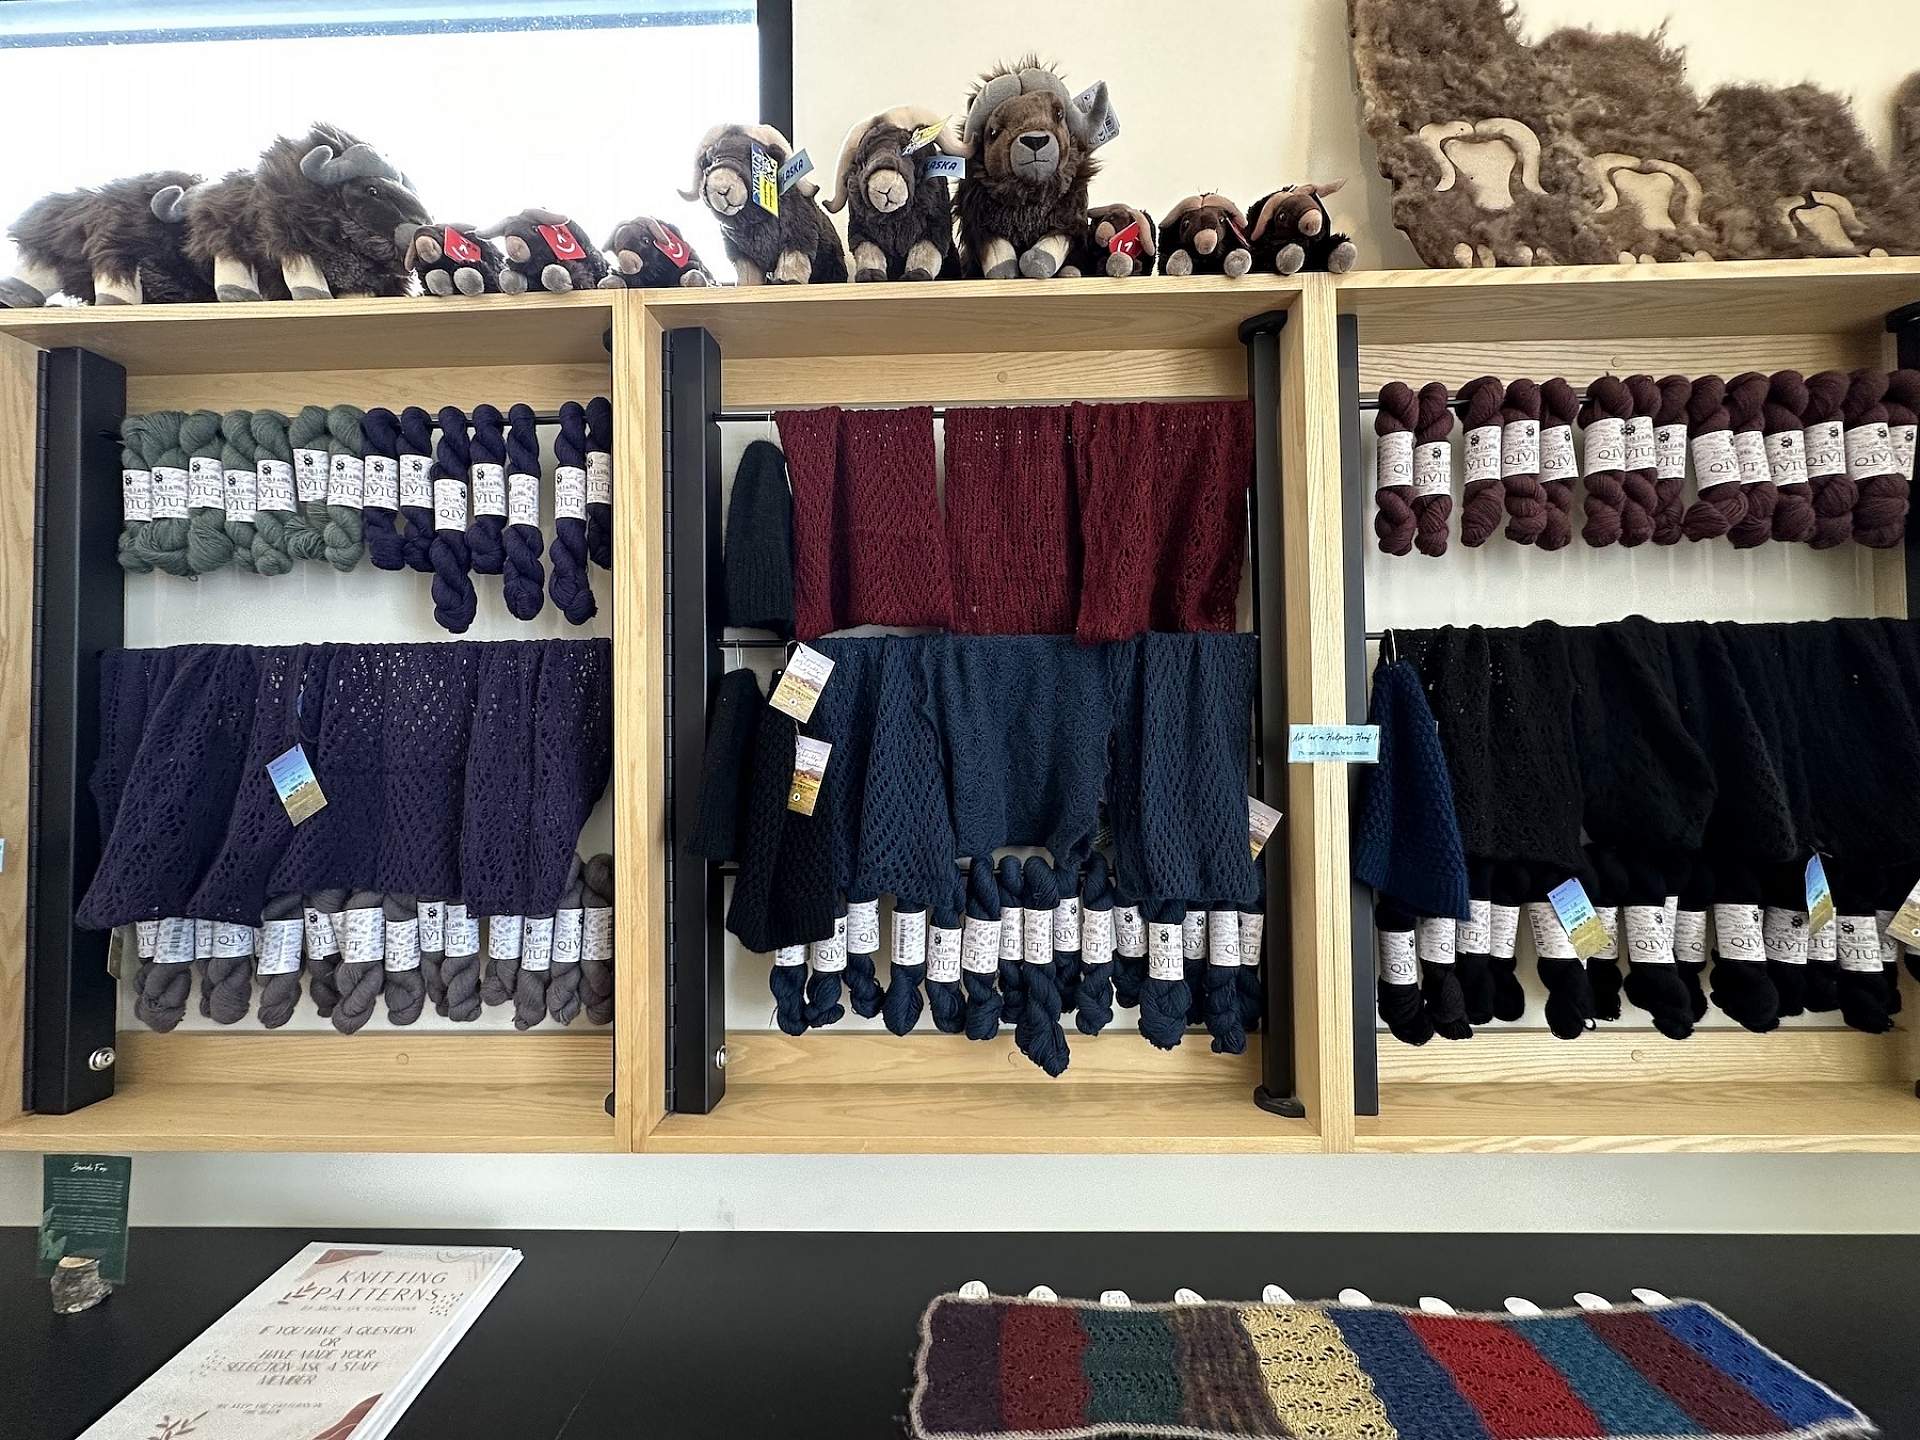 An array of finely crafted garnments made from qiviut line the walls of the gift shop at the Musk Ox Farm in Palmer, Alaska